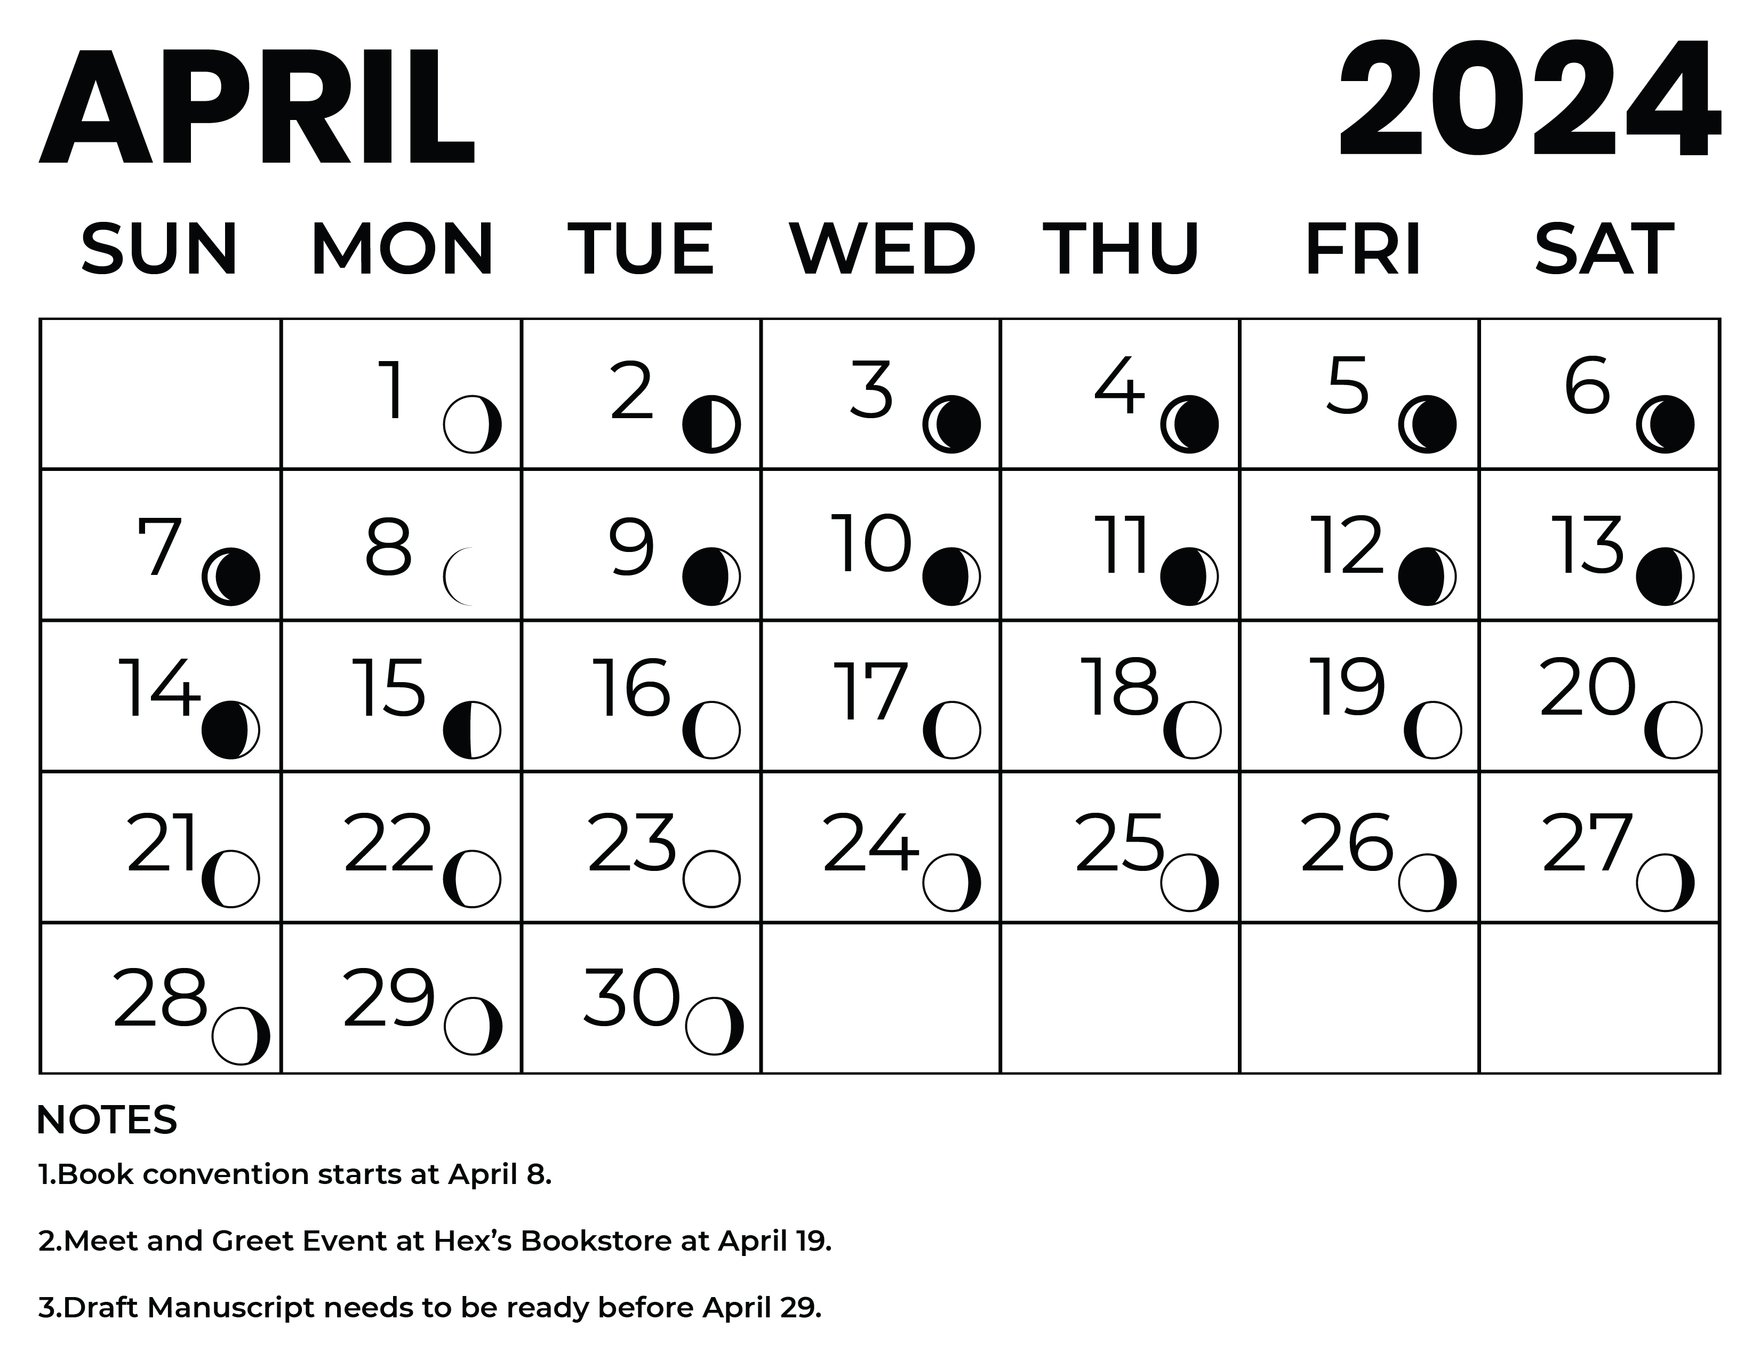 April 2024 Calendar With Moon Phases